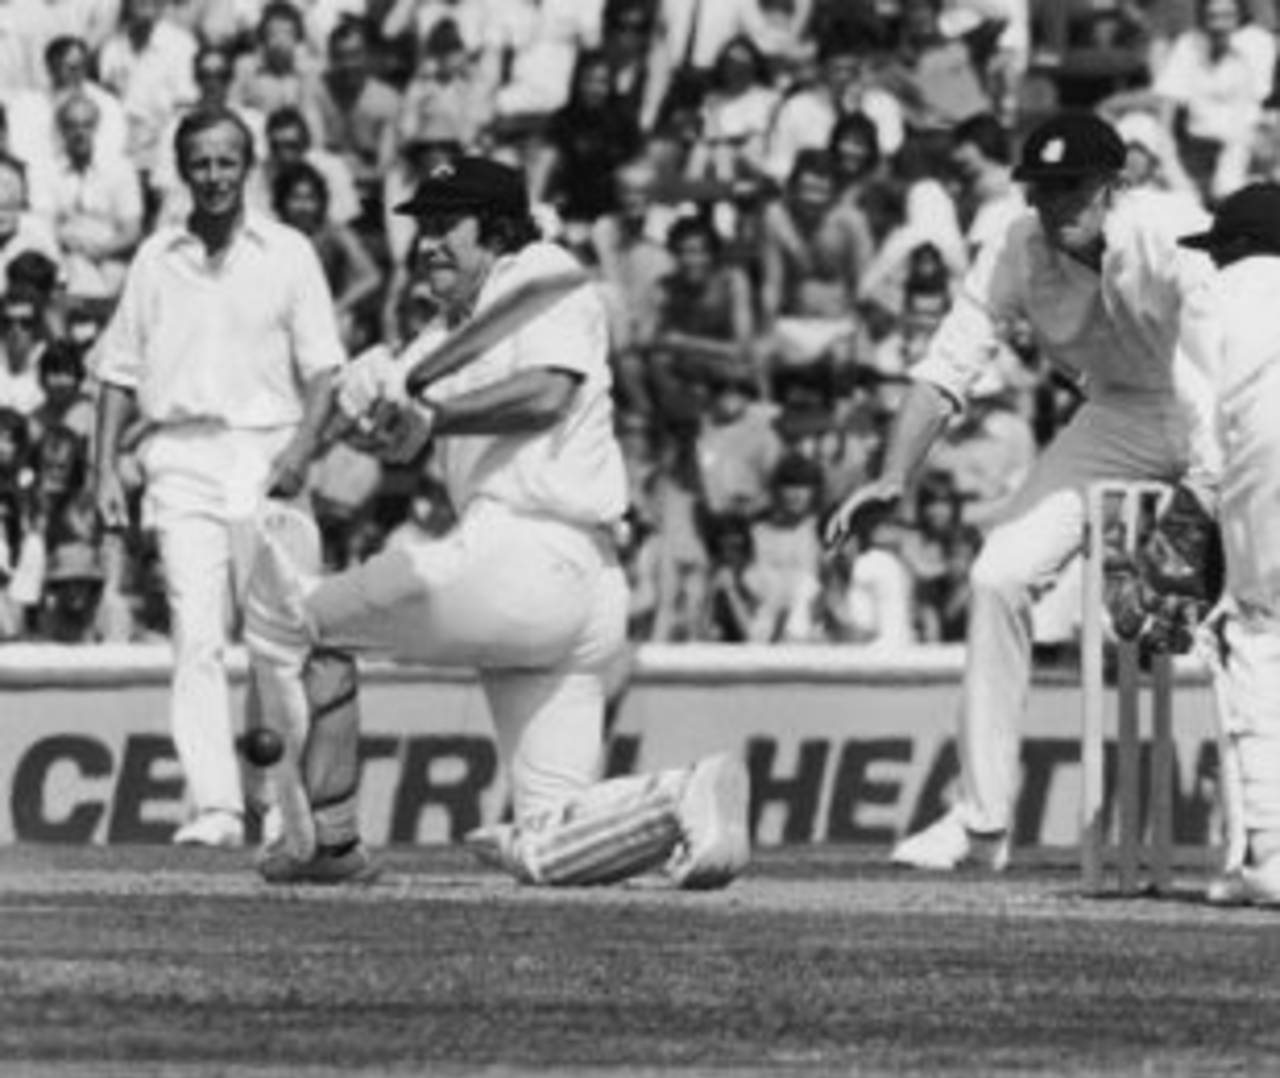 The summer of 1975 had the World Cup and the Ashes sharing top billing&nbsp;&nbsp;&bull;&nbsp;&nbsp;Getty Images